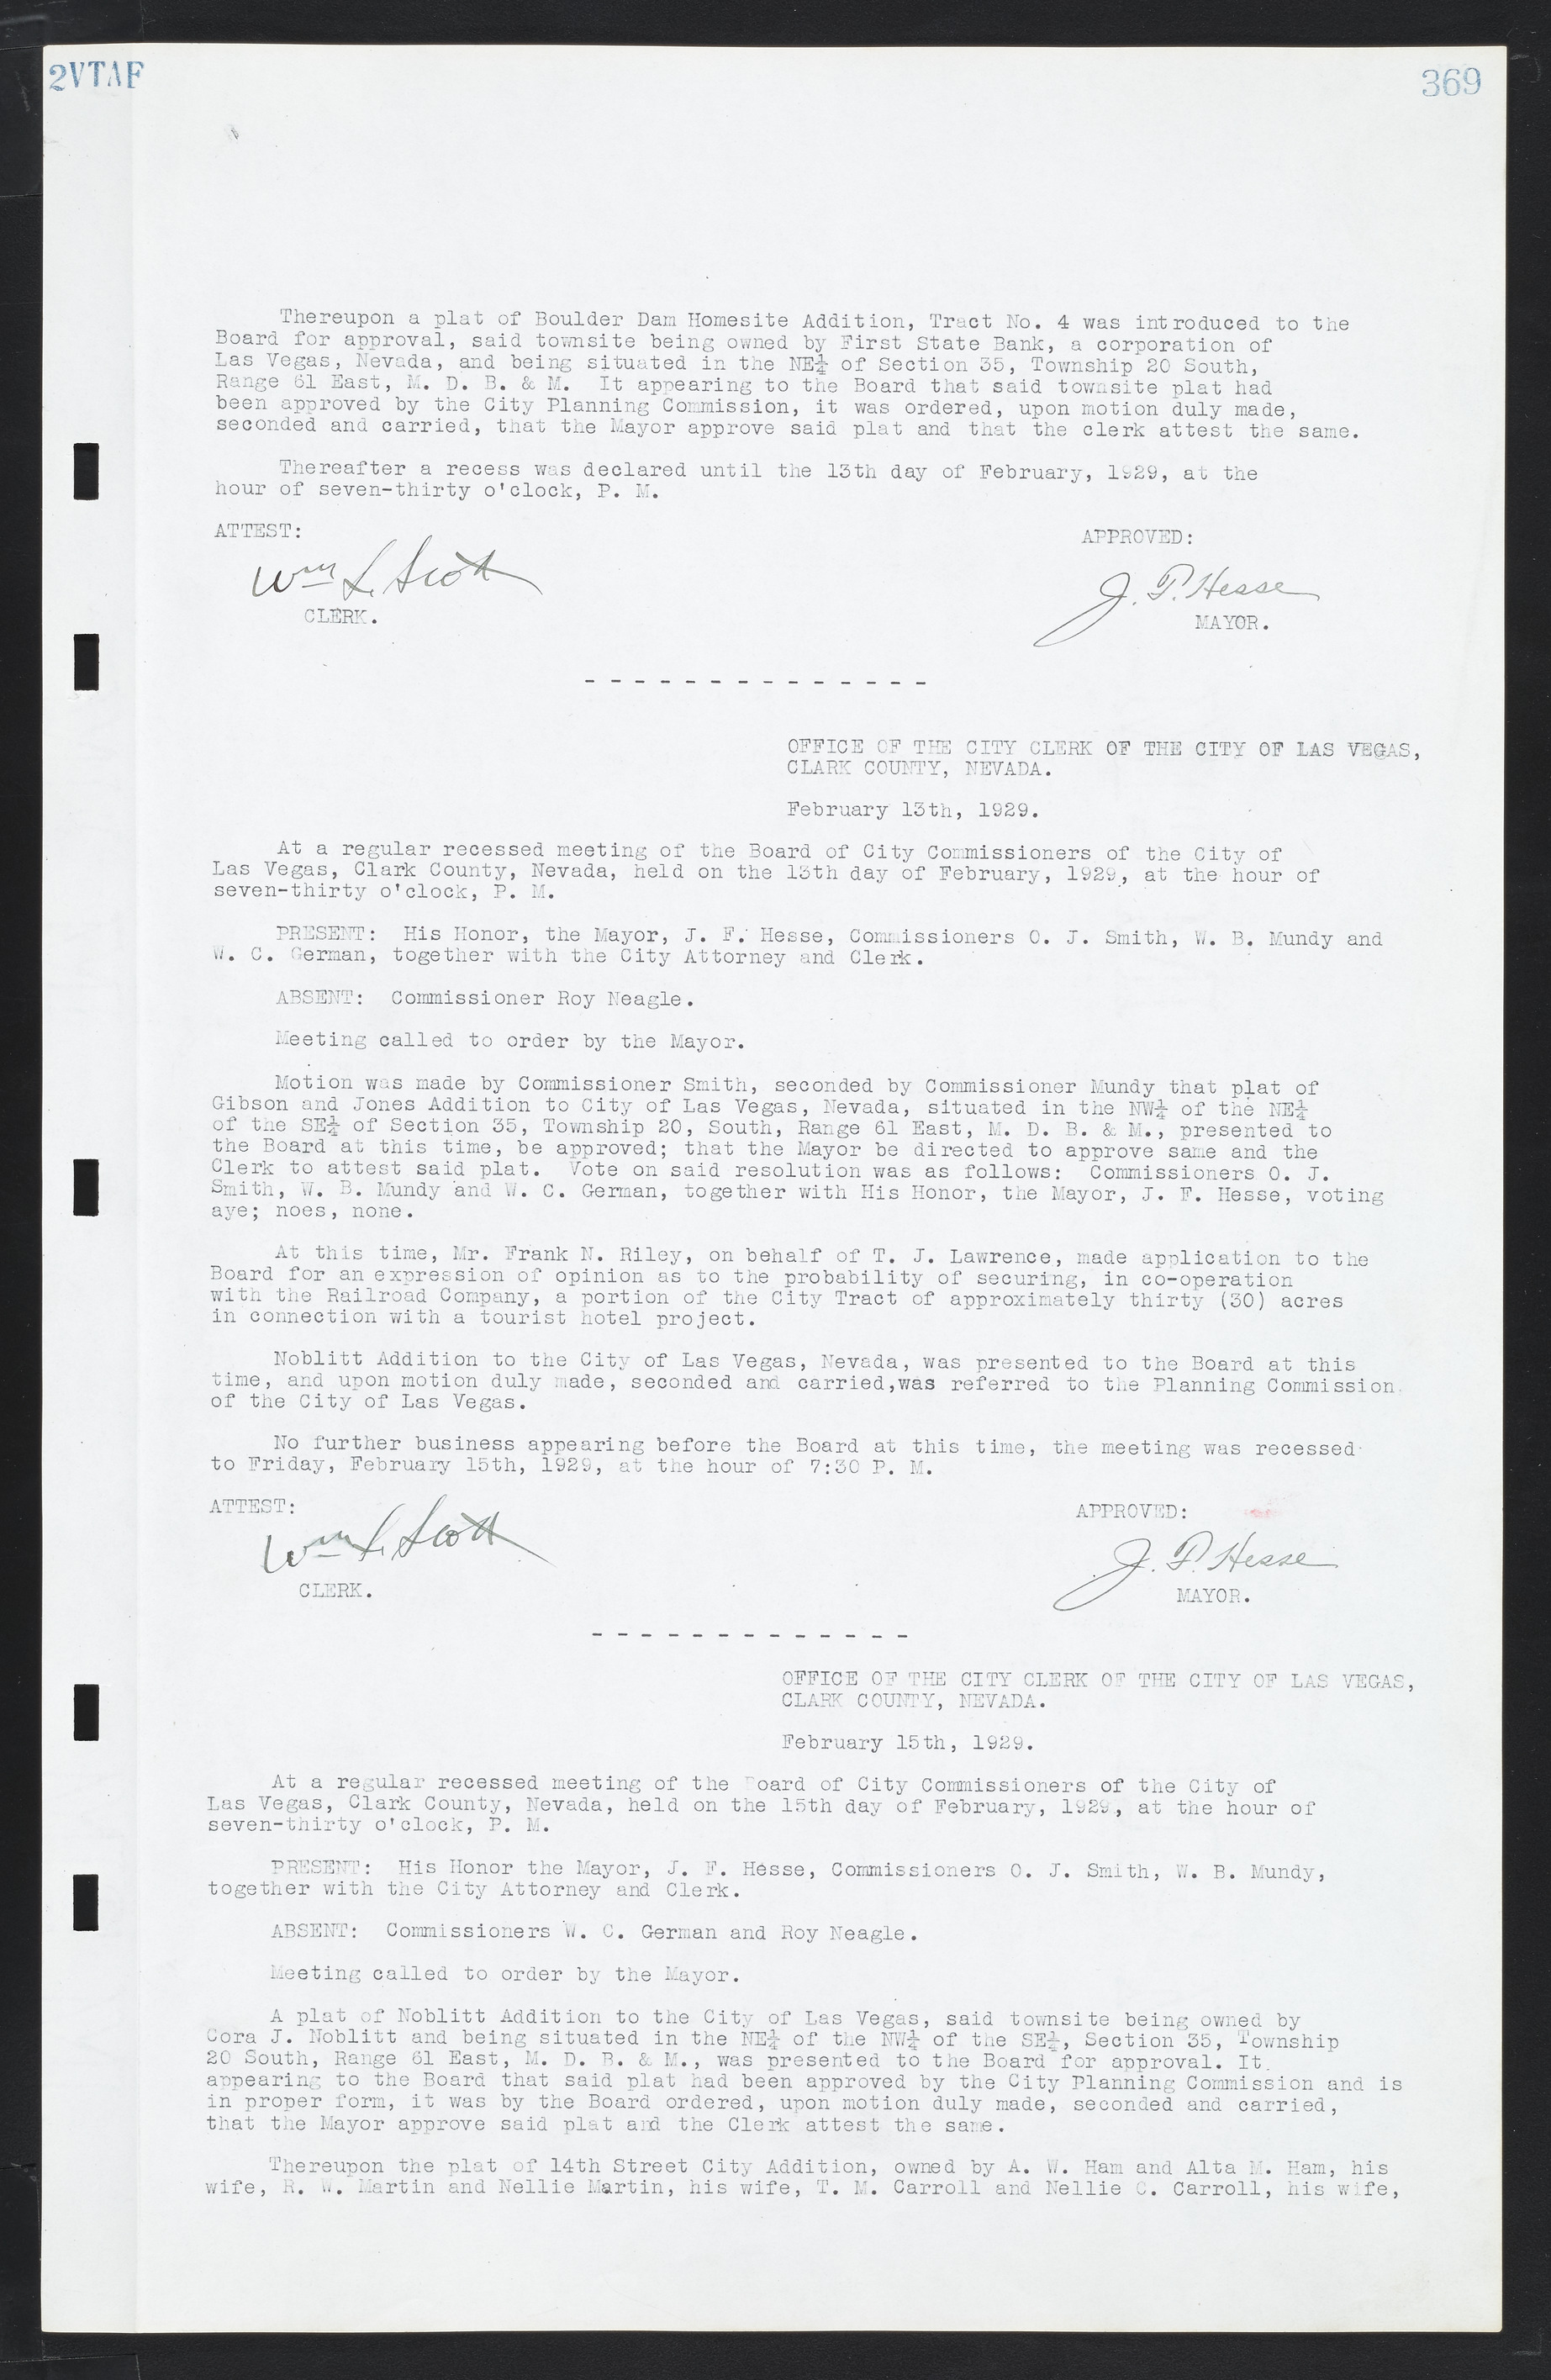 Las Vegas City Commission Minutes, March 1, 1922 to May 10, 1929, lvc000002-378